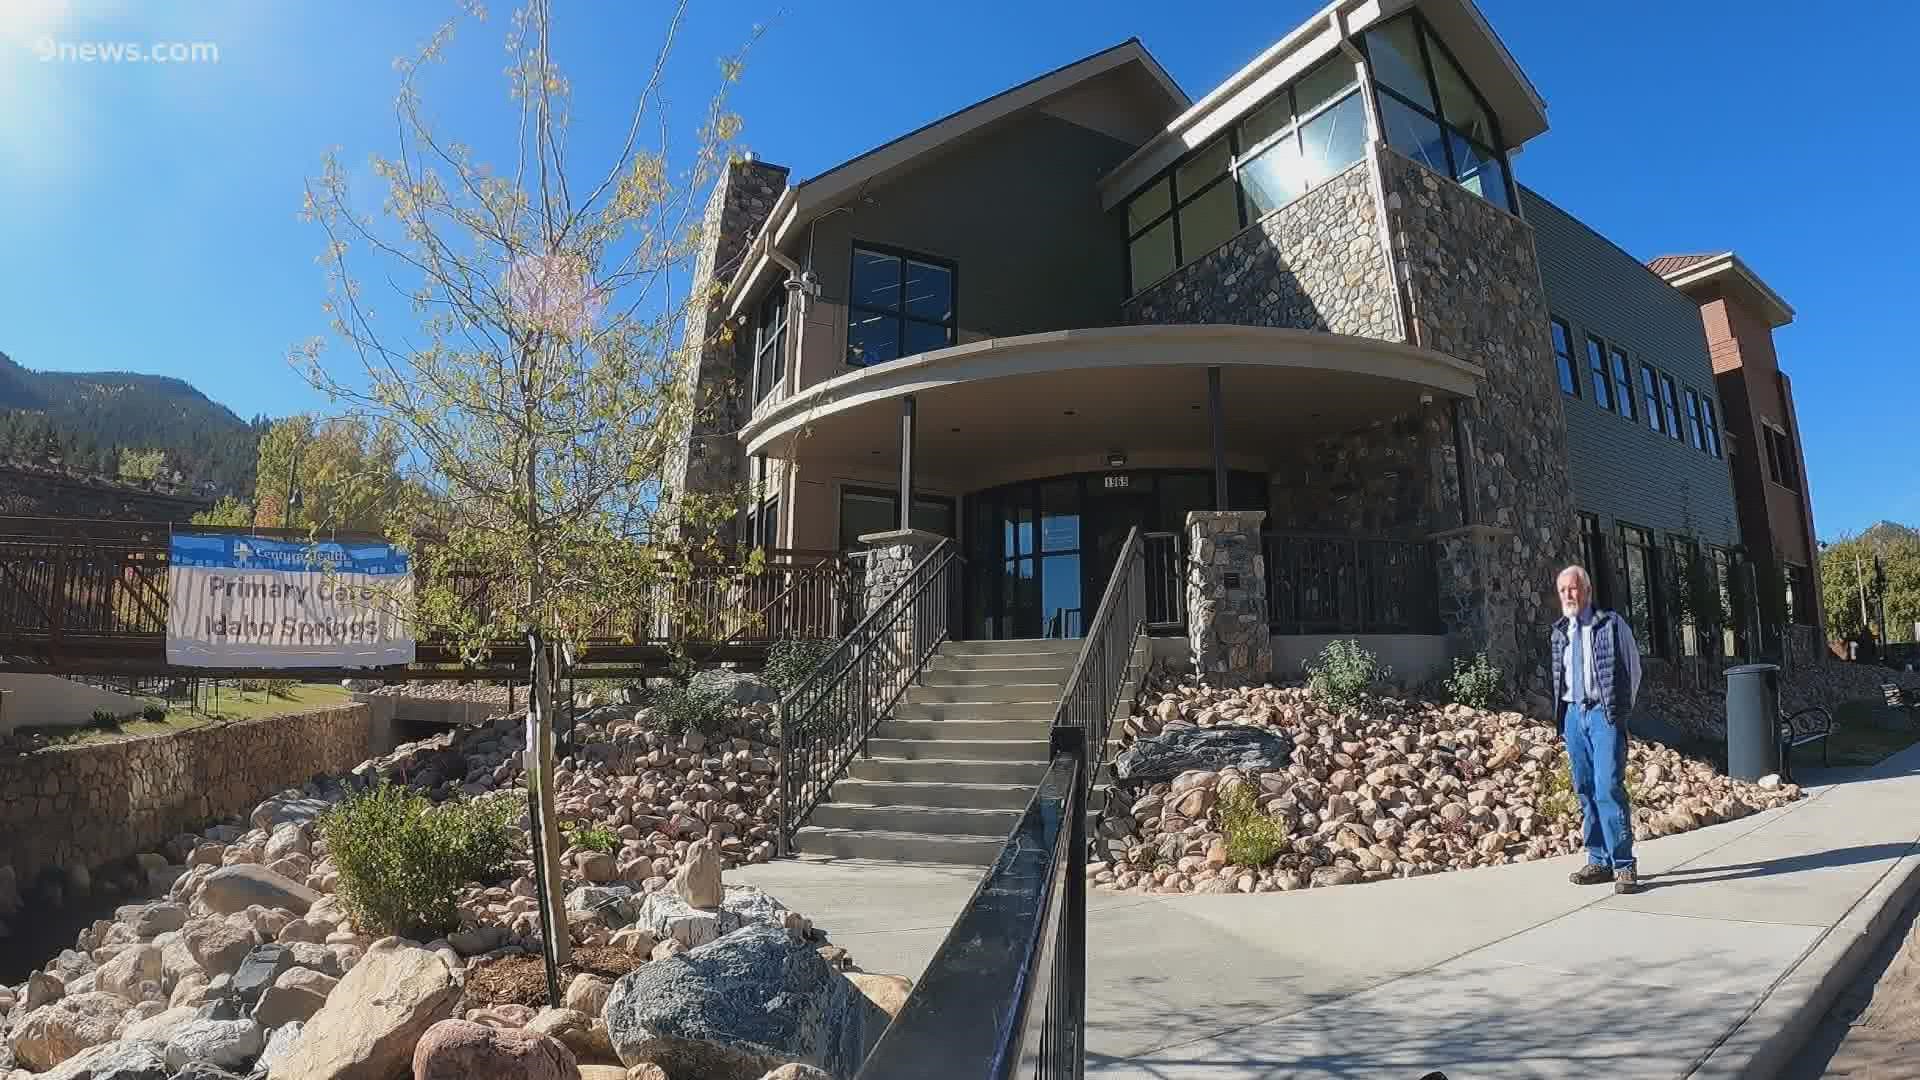 The Clear Creek County Health and Wellness Center in Idaho Springs is open with several health care options under one roof.